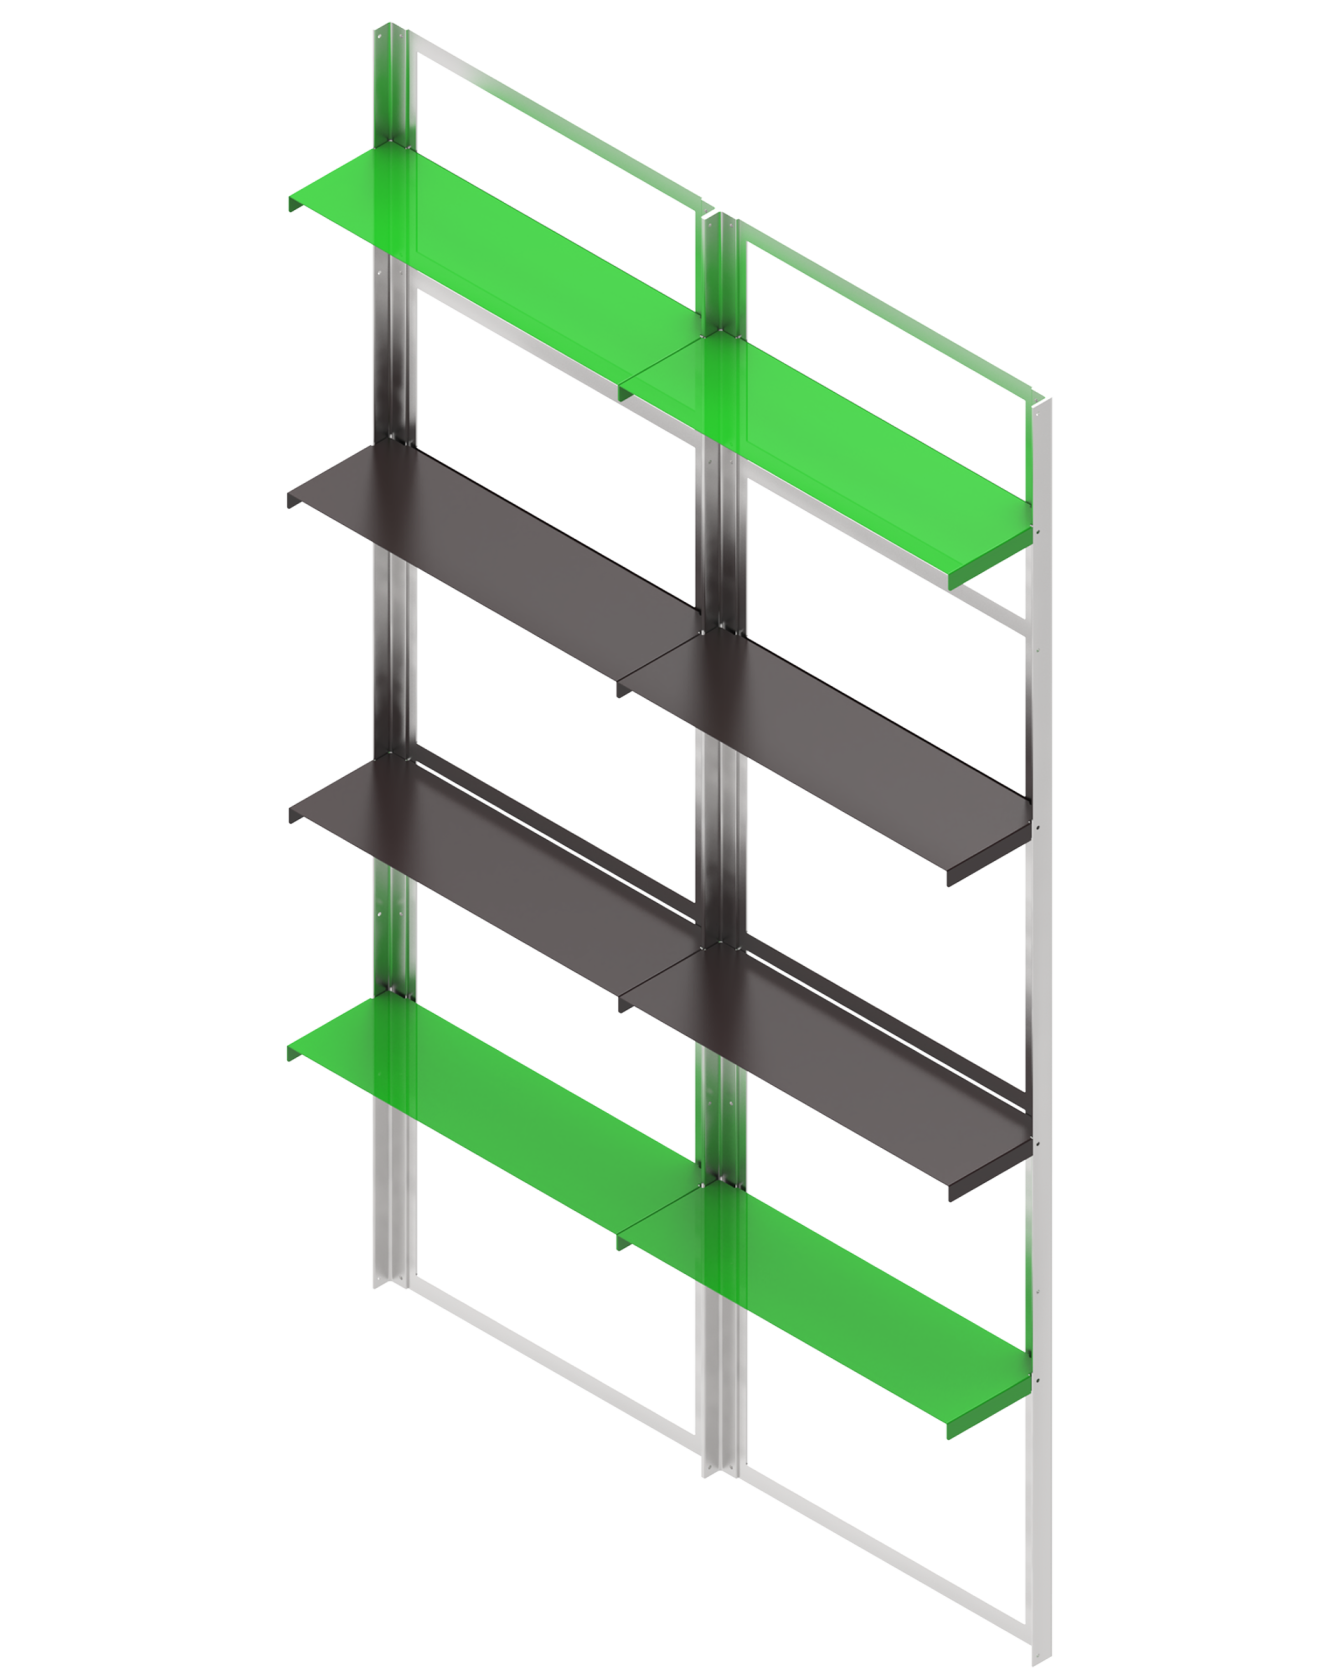 https://possi.kitchen/wp-content/uploads/Doubleshelf_bright_green_black_red-1344x1680.png